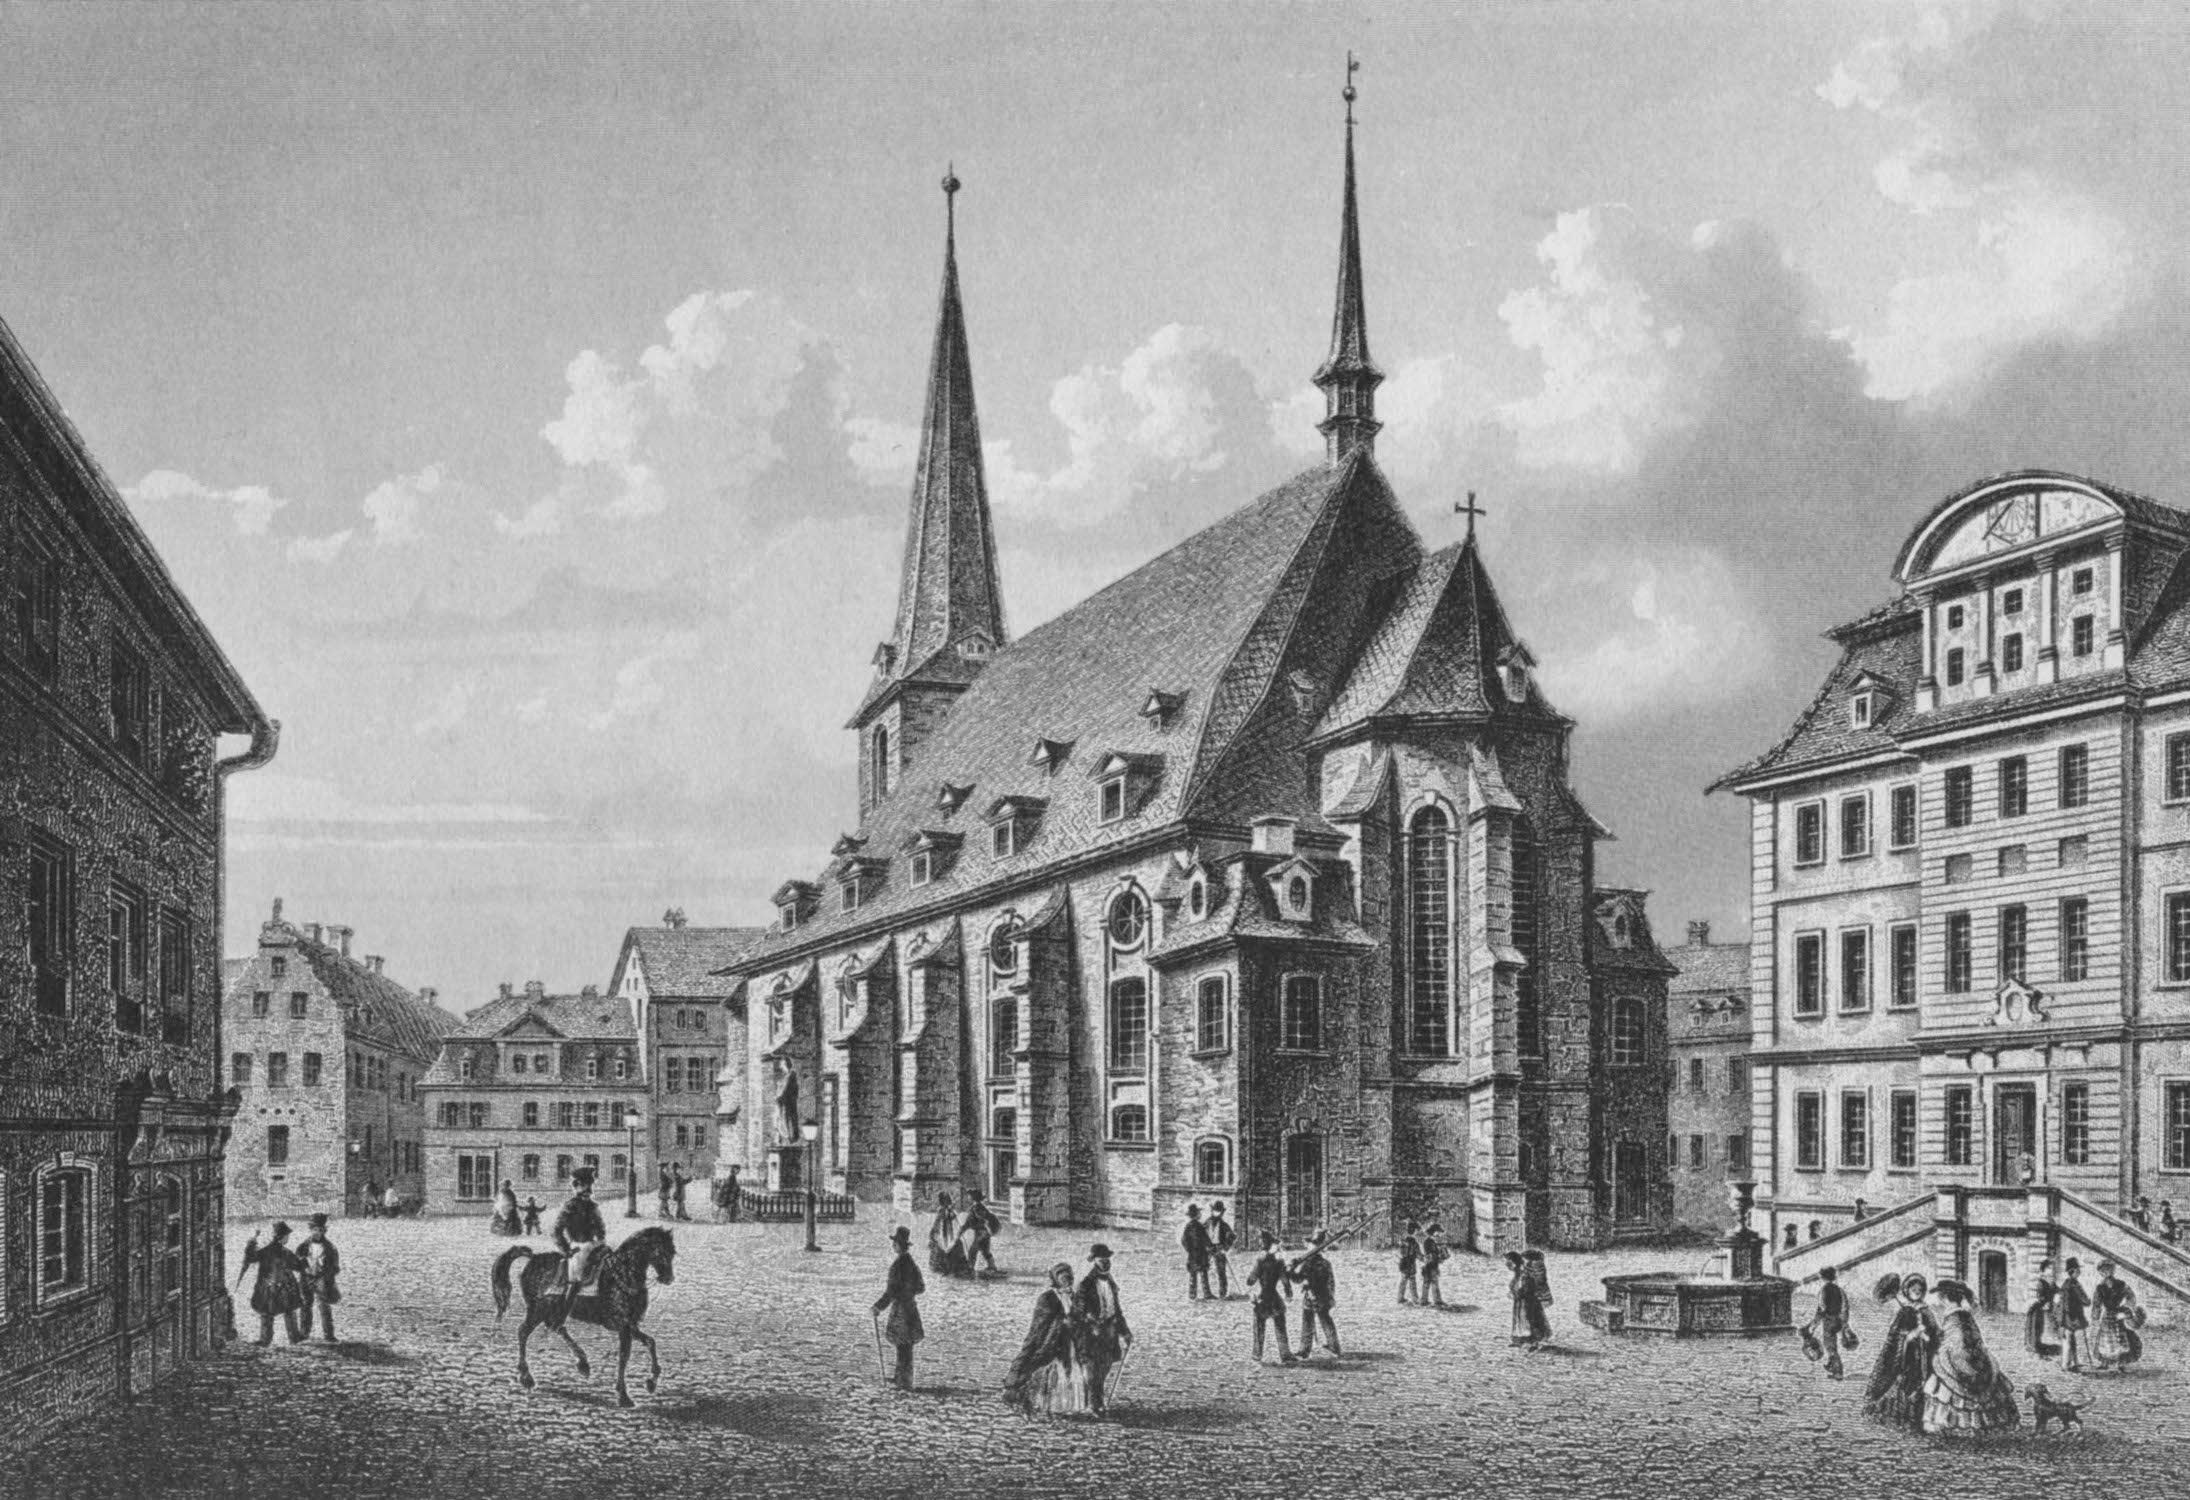 A view of the Herderplatz in Weimar from the southeast (etching by L. Oeder, 1840). The church of Saint-Paul and Saint-Peter, also known as the Herderkirche, saw the premieres of several Bach cantatas. John Eliot Gardiner suggests that Bach cantatas using a festive orchestra were first performed there, including his first cantata for Christmas, Christen, ätzet diesen Tag, BWV 63 and Der Himmel lacht! Die Erde jubilieret, BWV 31 for the Easter Sunday of 1715, scored for soloists, a five-part choir and three instrumental groups. Bach frequently played the organ, and two of his sons were baptized in the church.